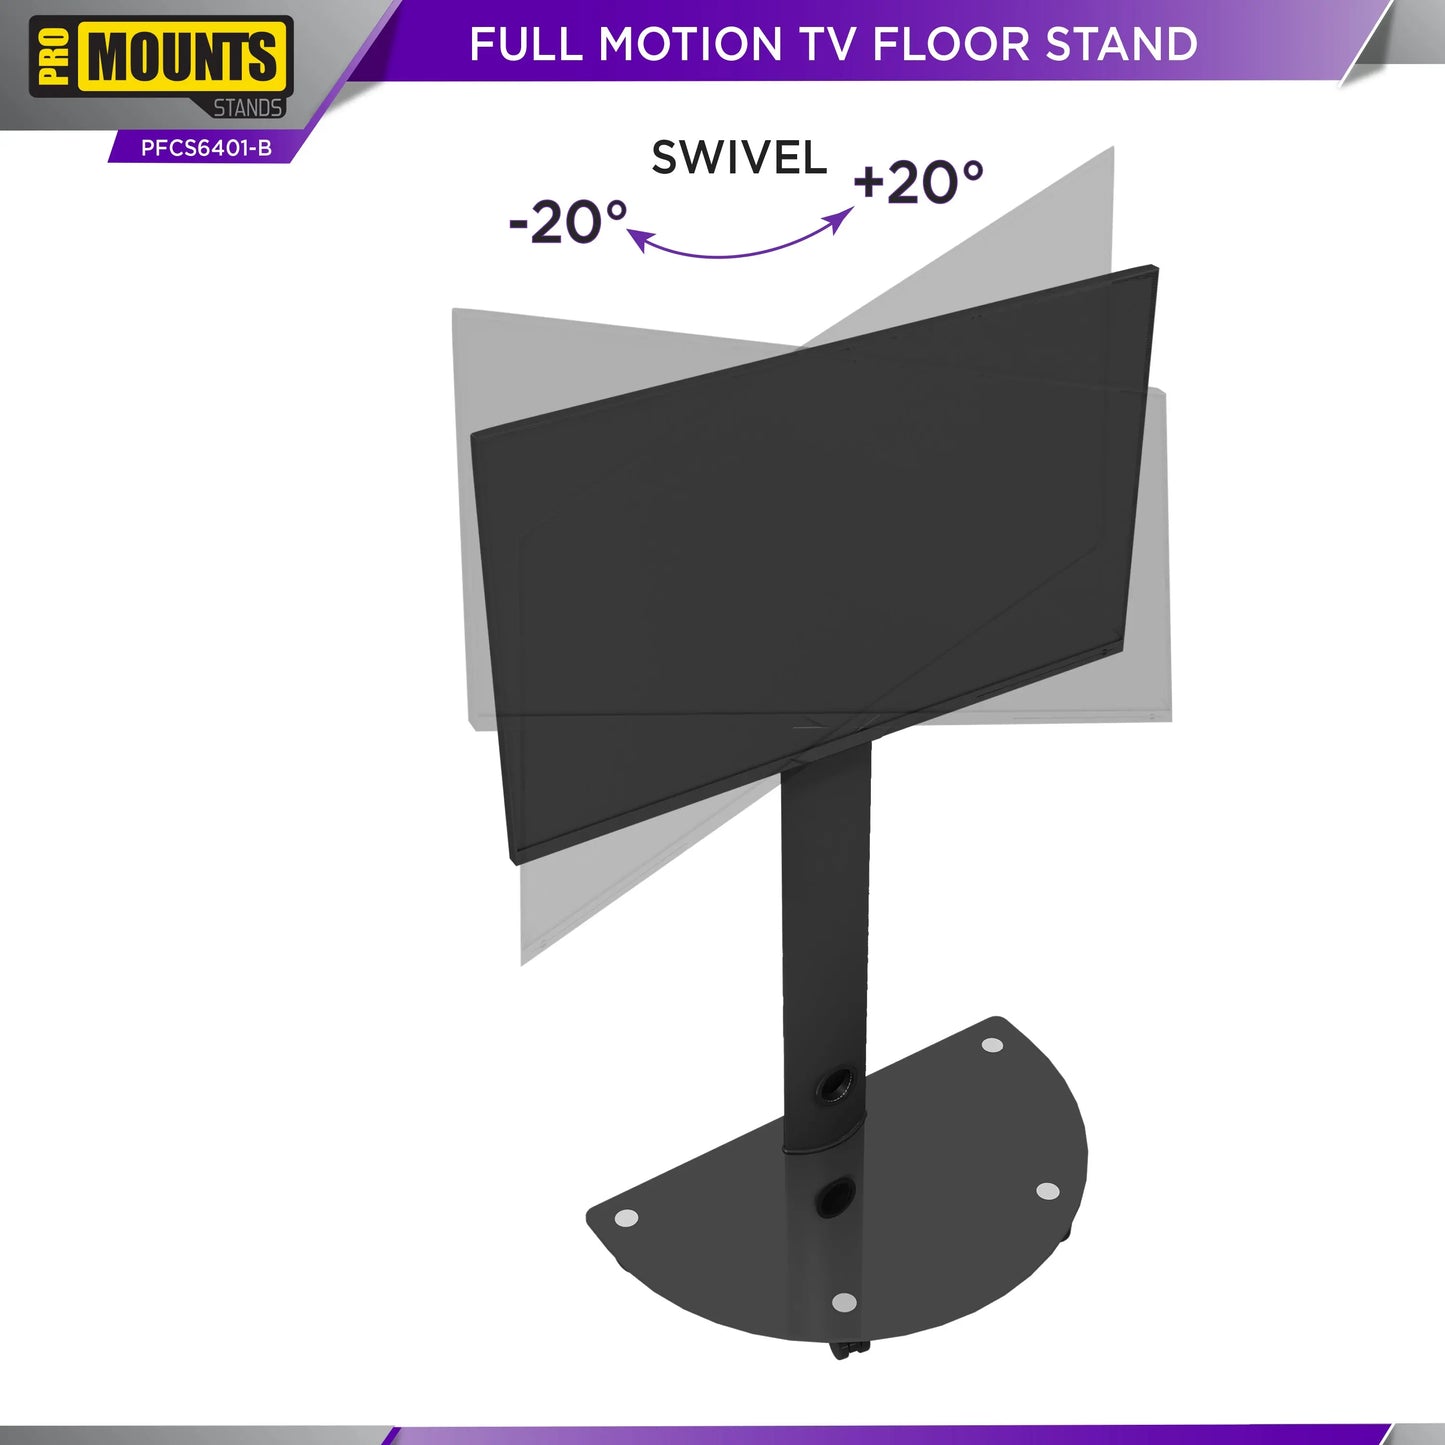 ProMounts Mobile TV Stand Mount for 32” to 72” Screens, Holds up to 88lbs (PFCS6401-B)